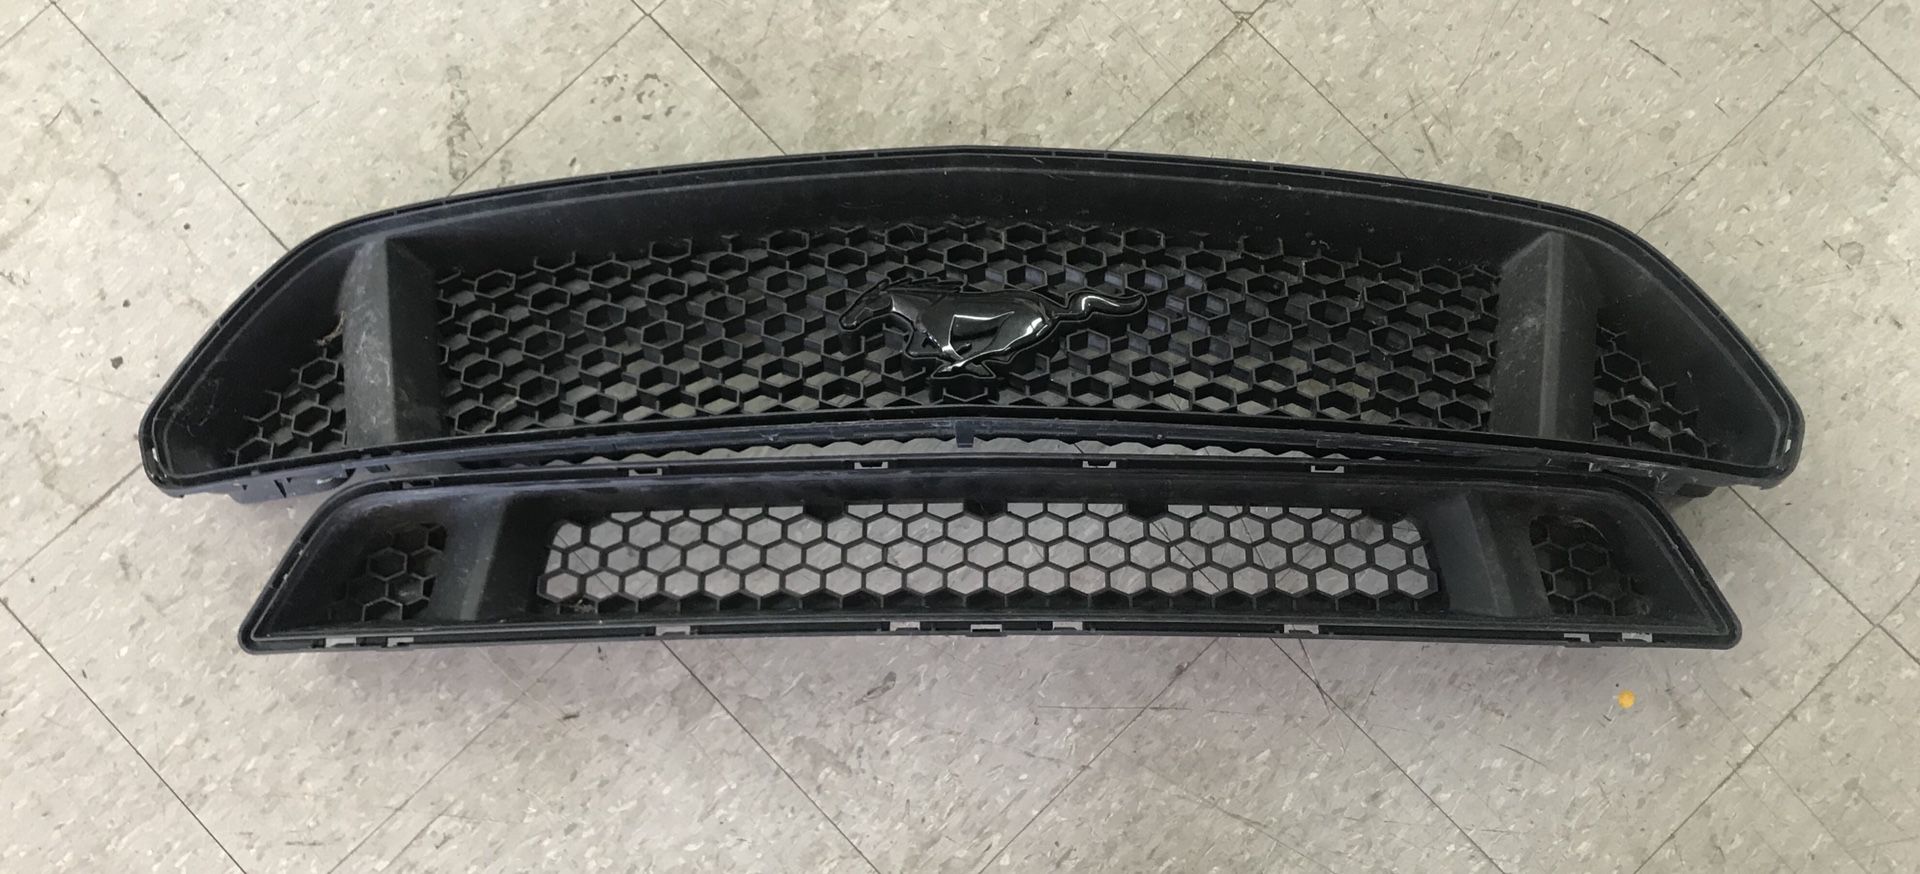 2015 - 2017 Ford Mustang Grille(s)